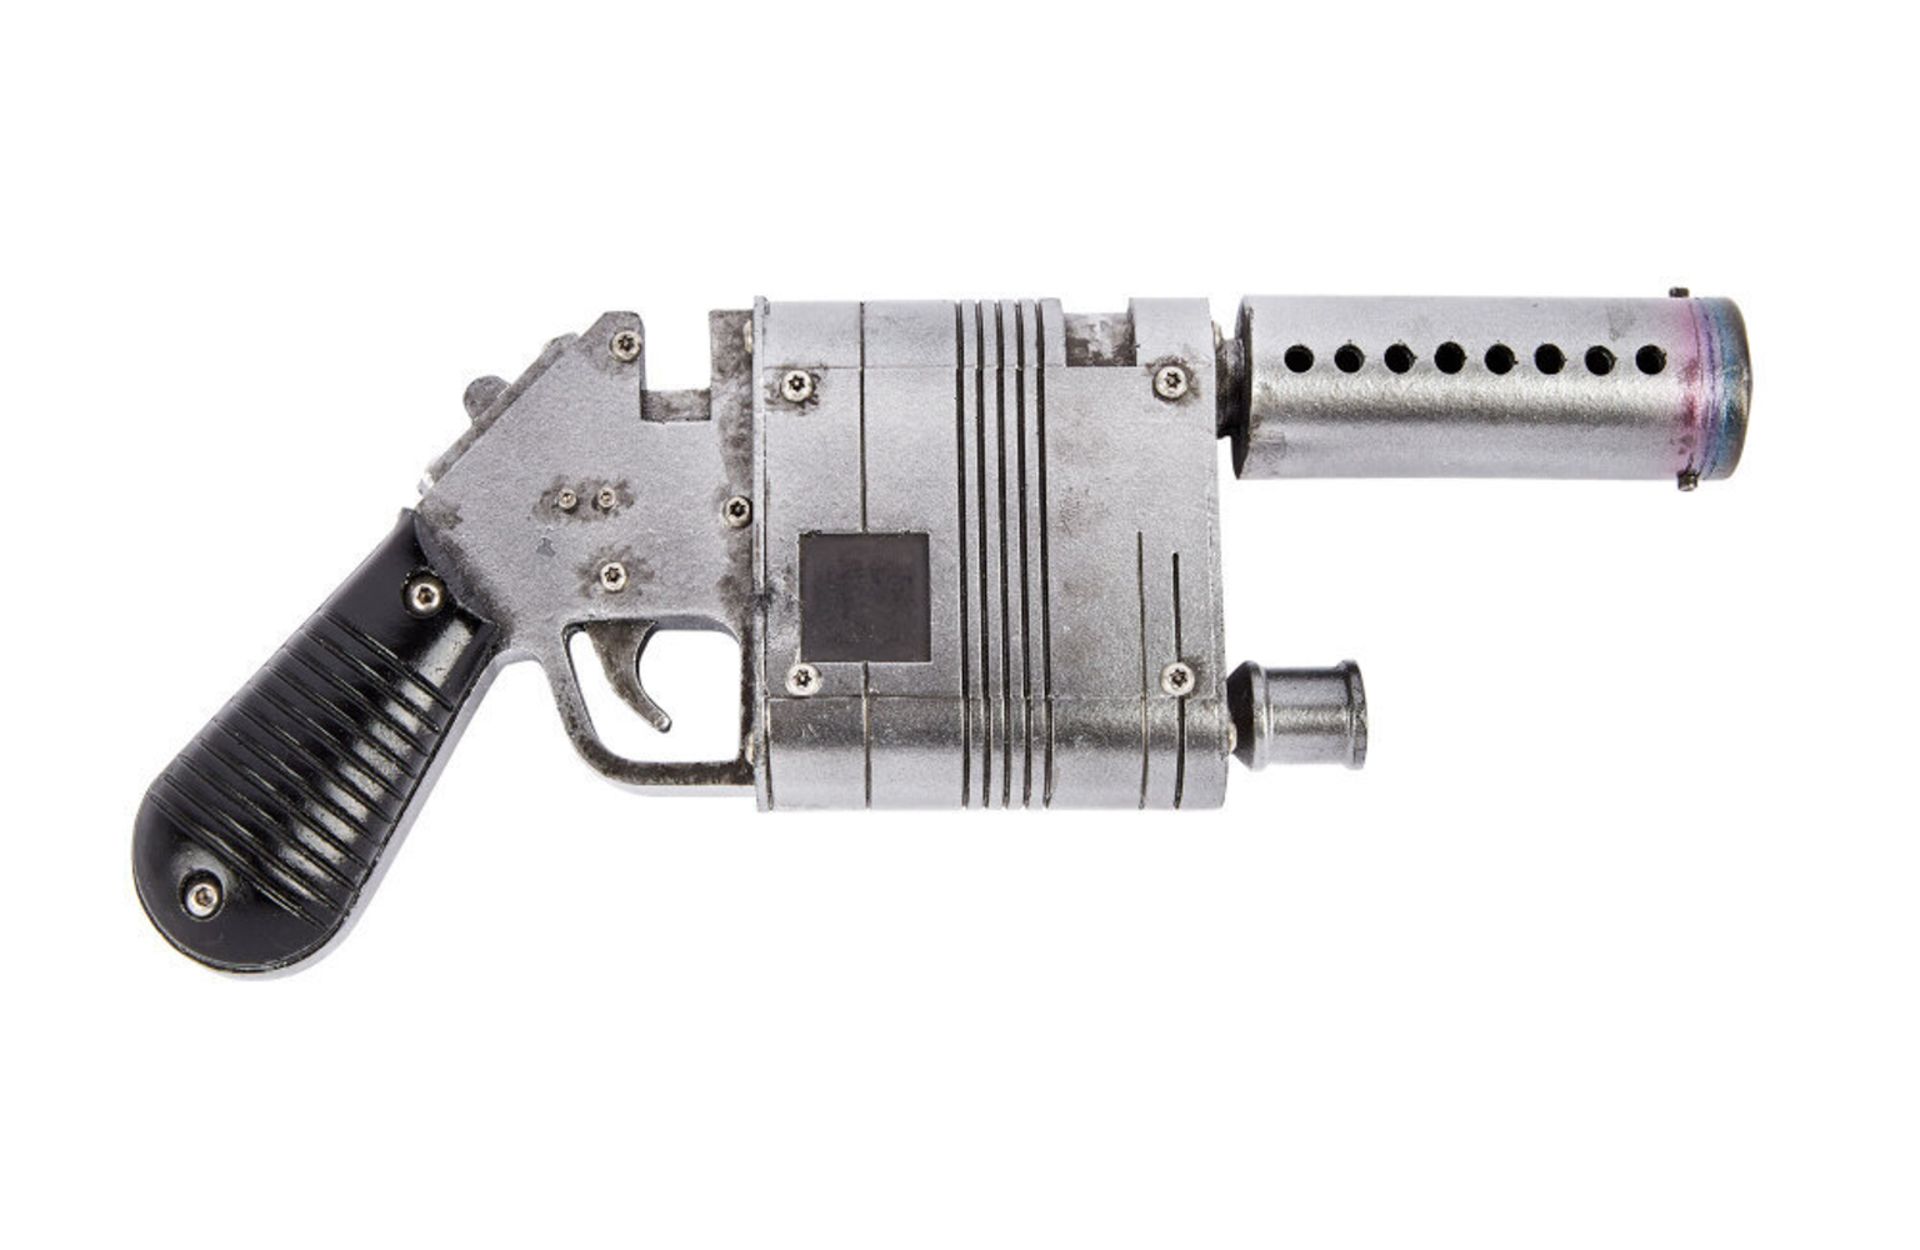 STAR WARS - THE FORCE AWAKENS | DAISY RIDLEY "REY" NN-14 BLASTER PROP (WITH DVD) - Image 2 of 15